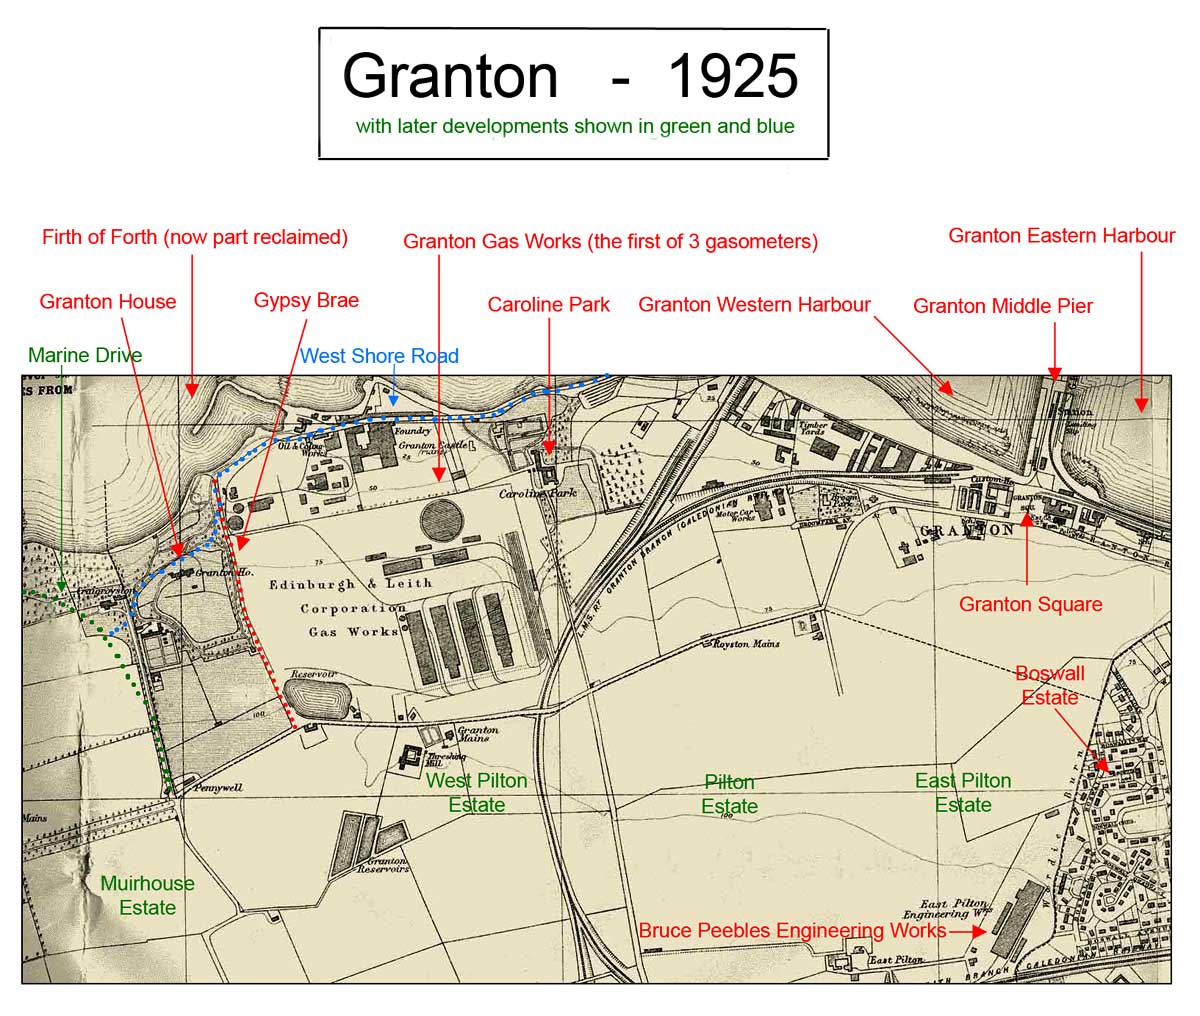 Map of Granton  -  1925  -  with key including Gypasy Brae